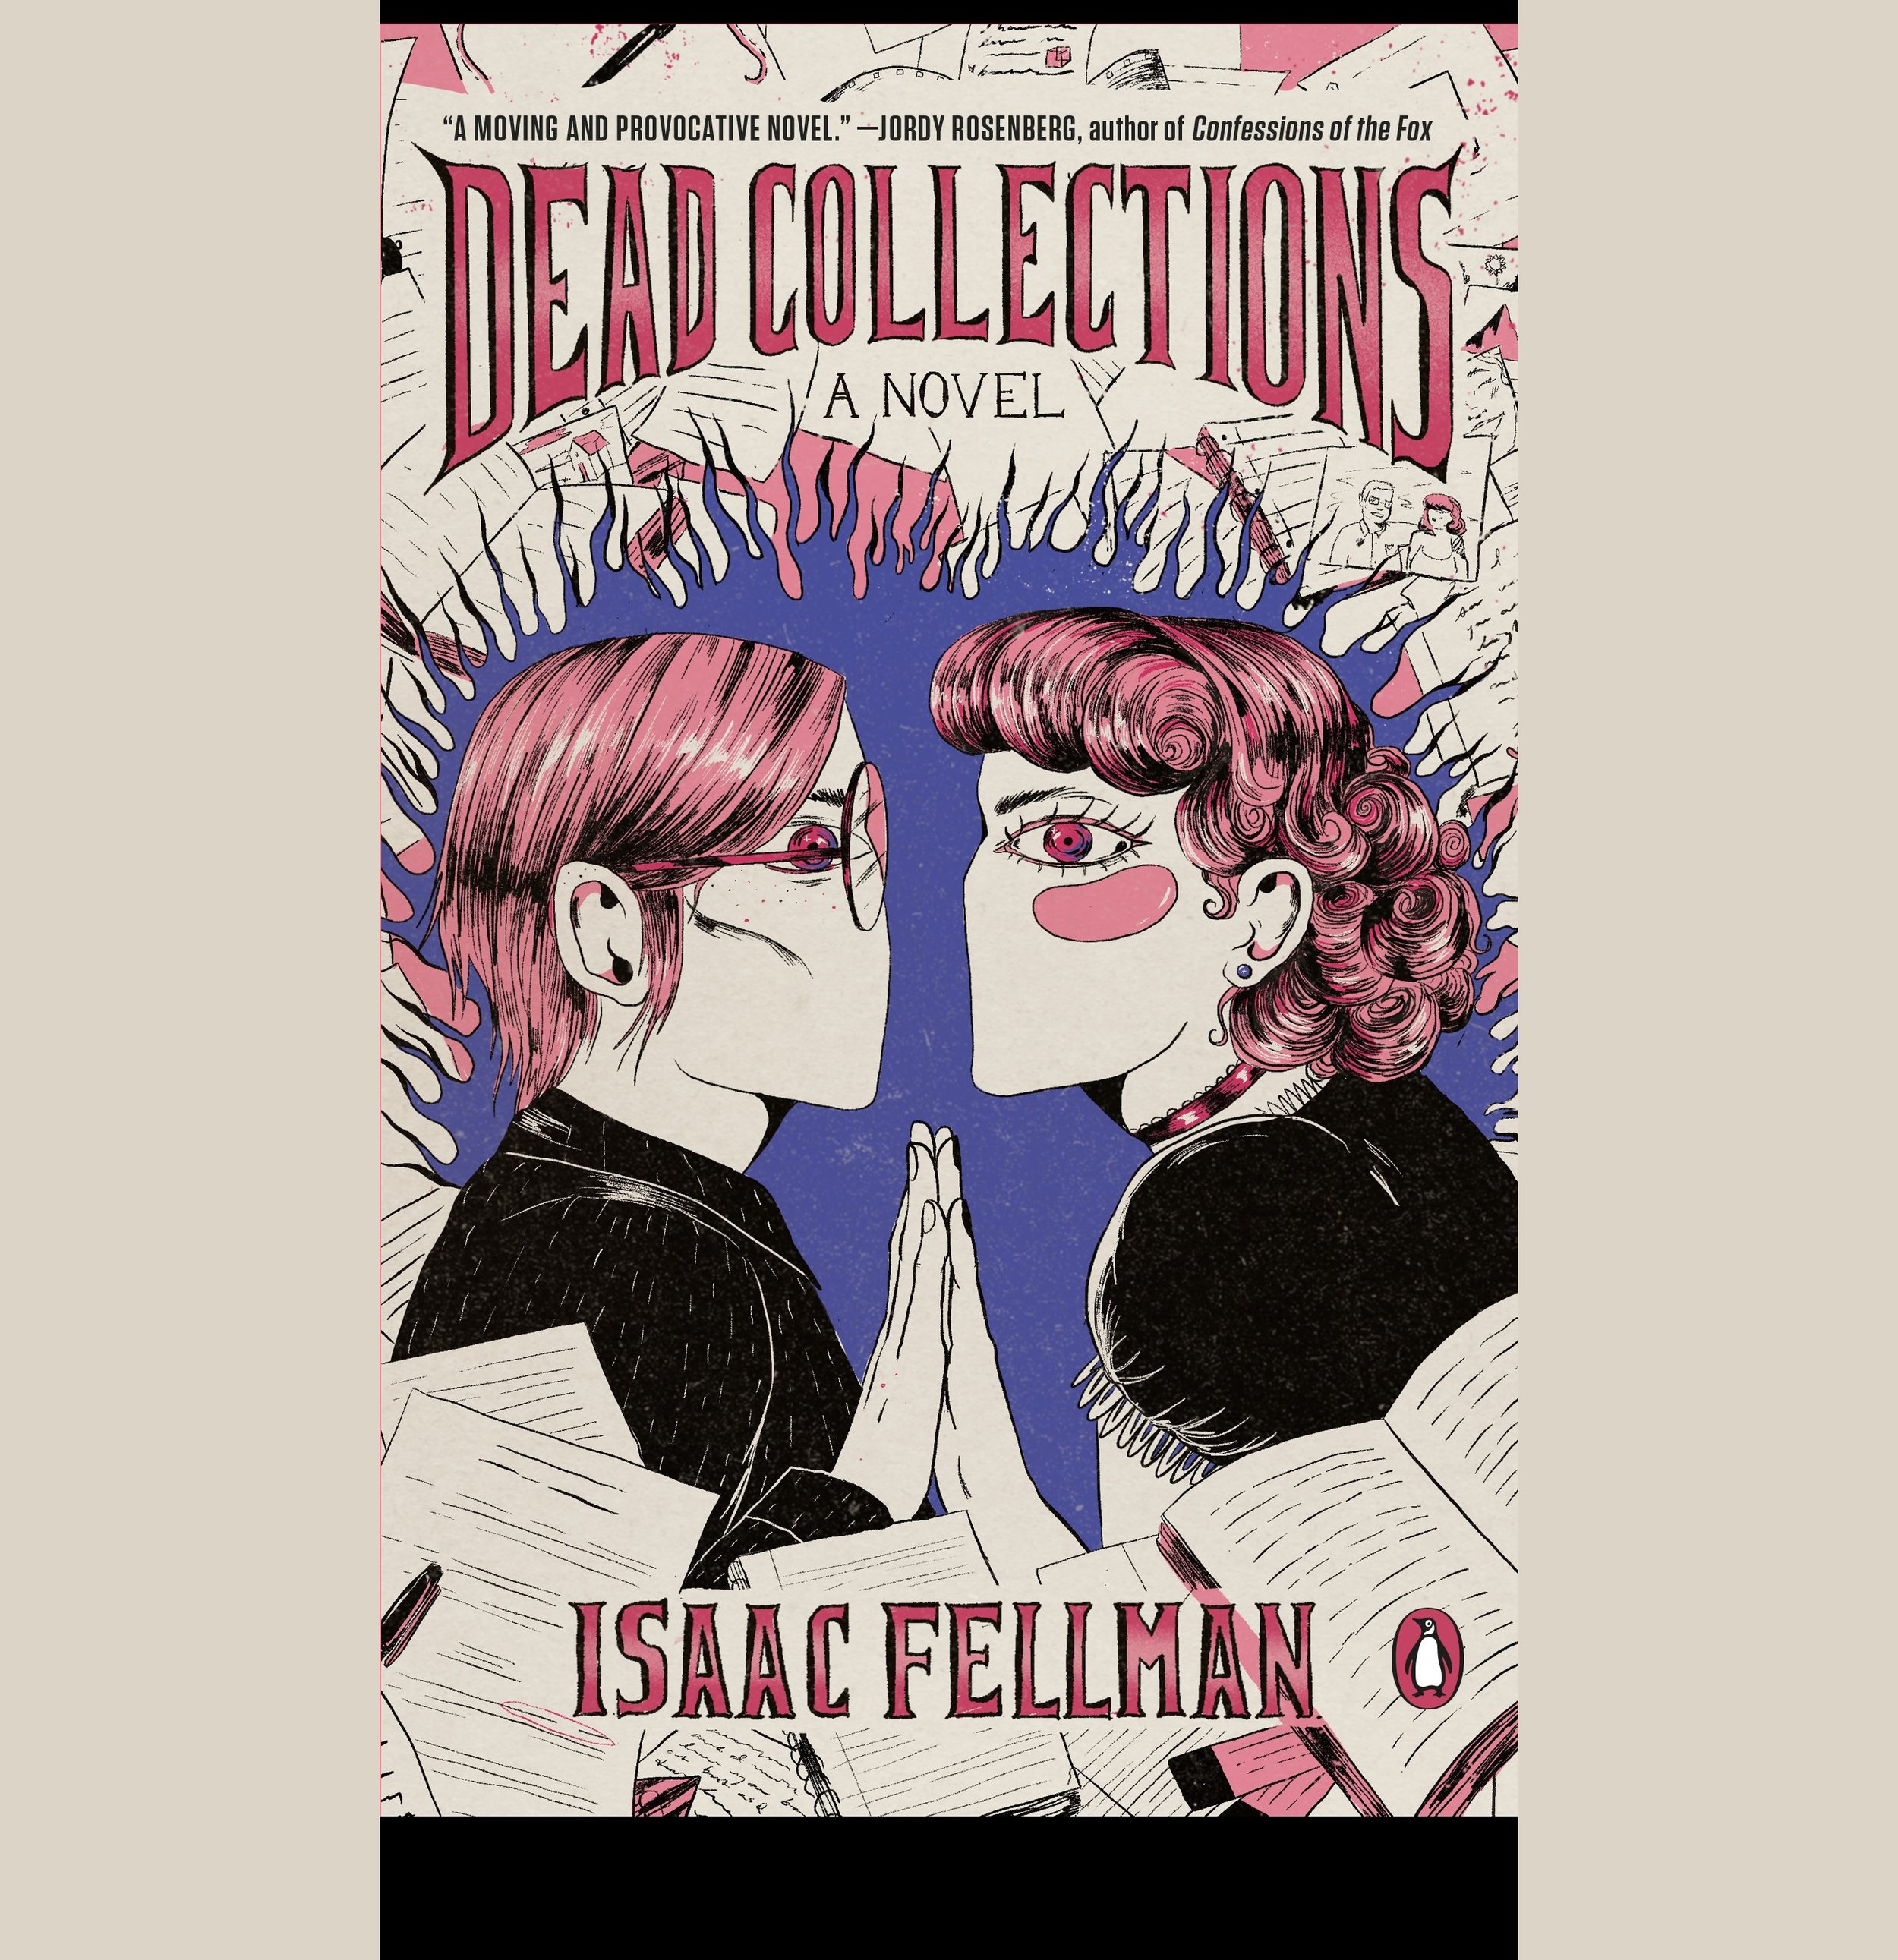 Dead Collections by Isaac Fellman